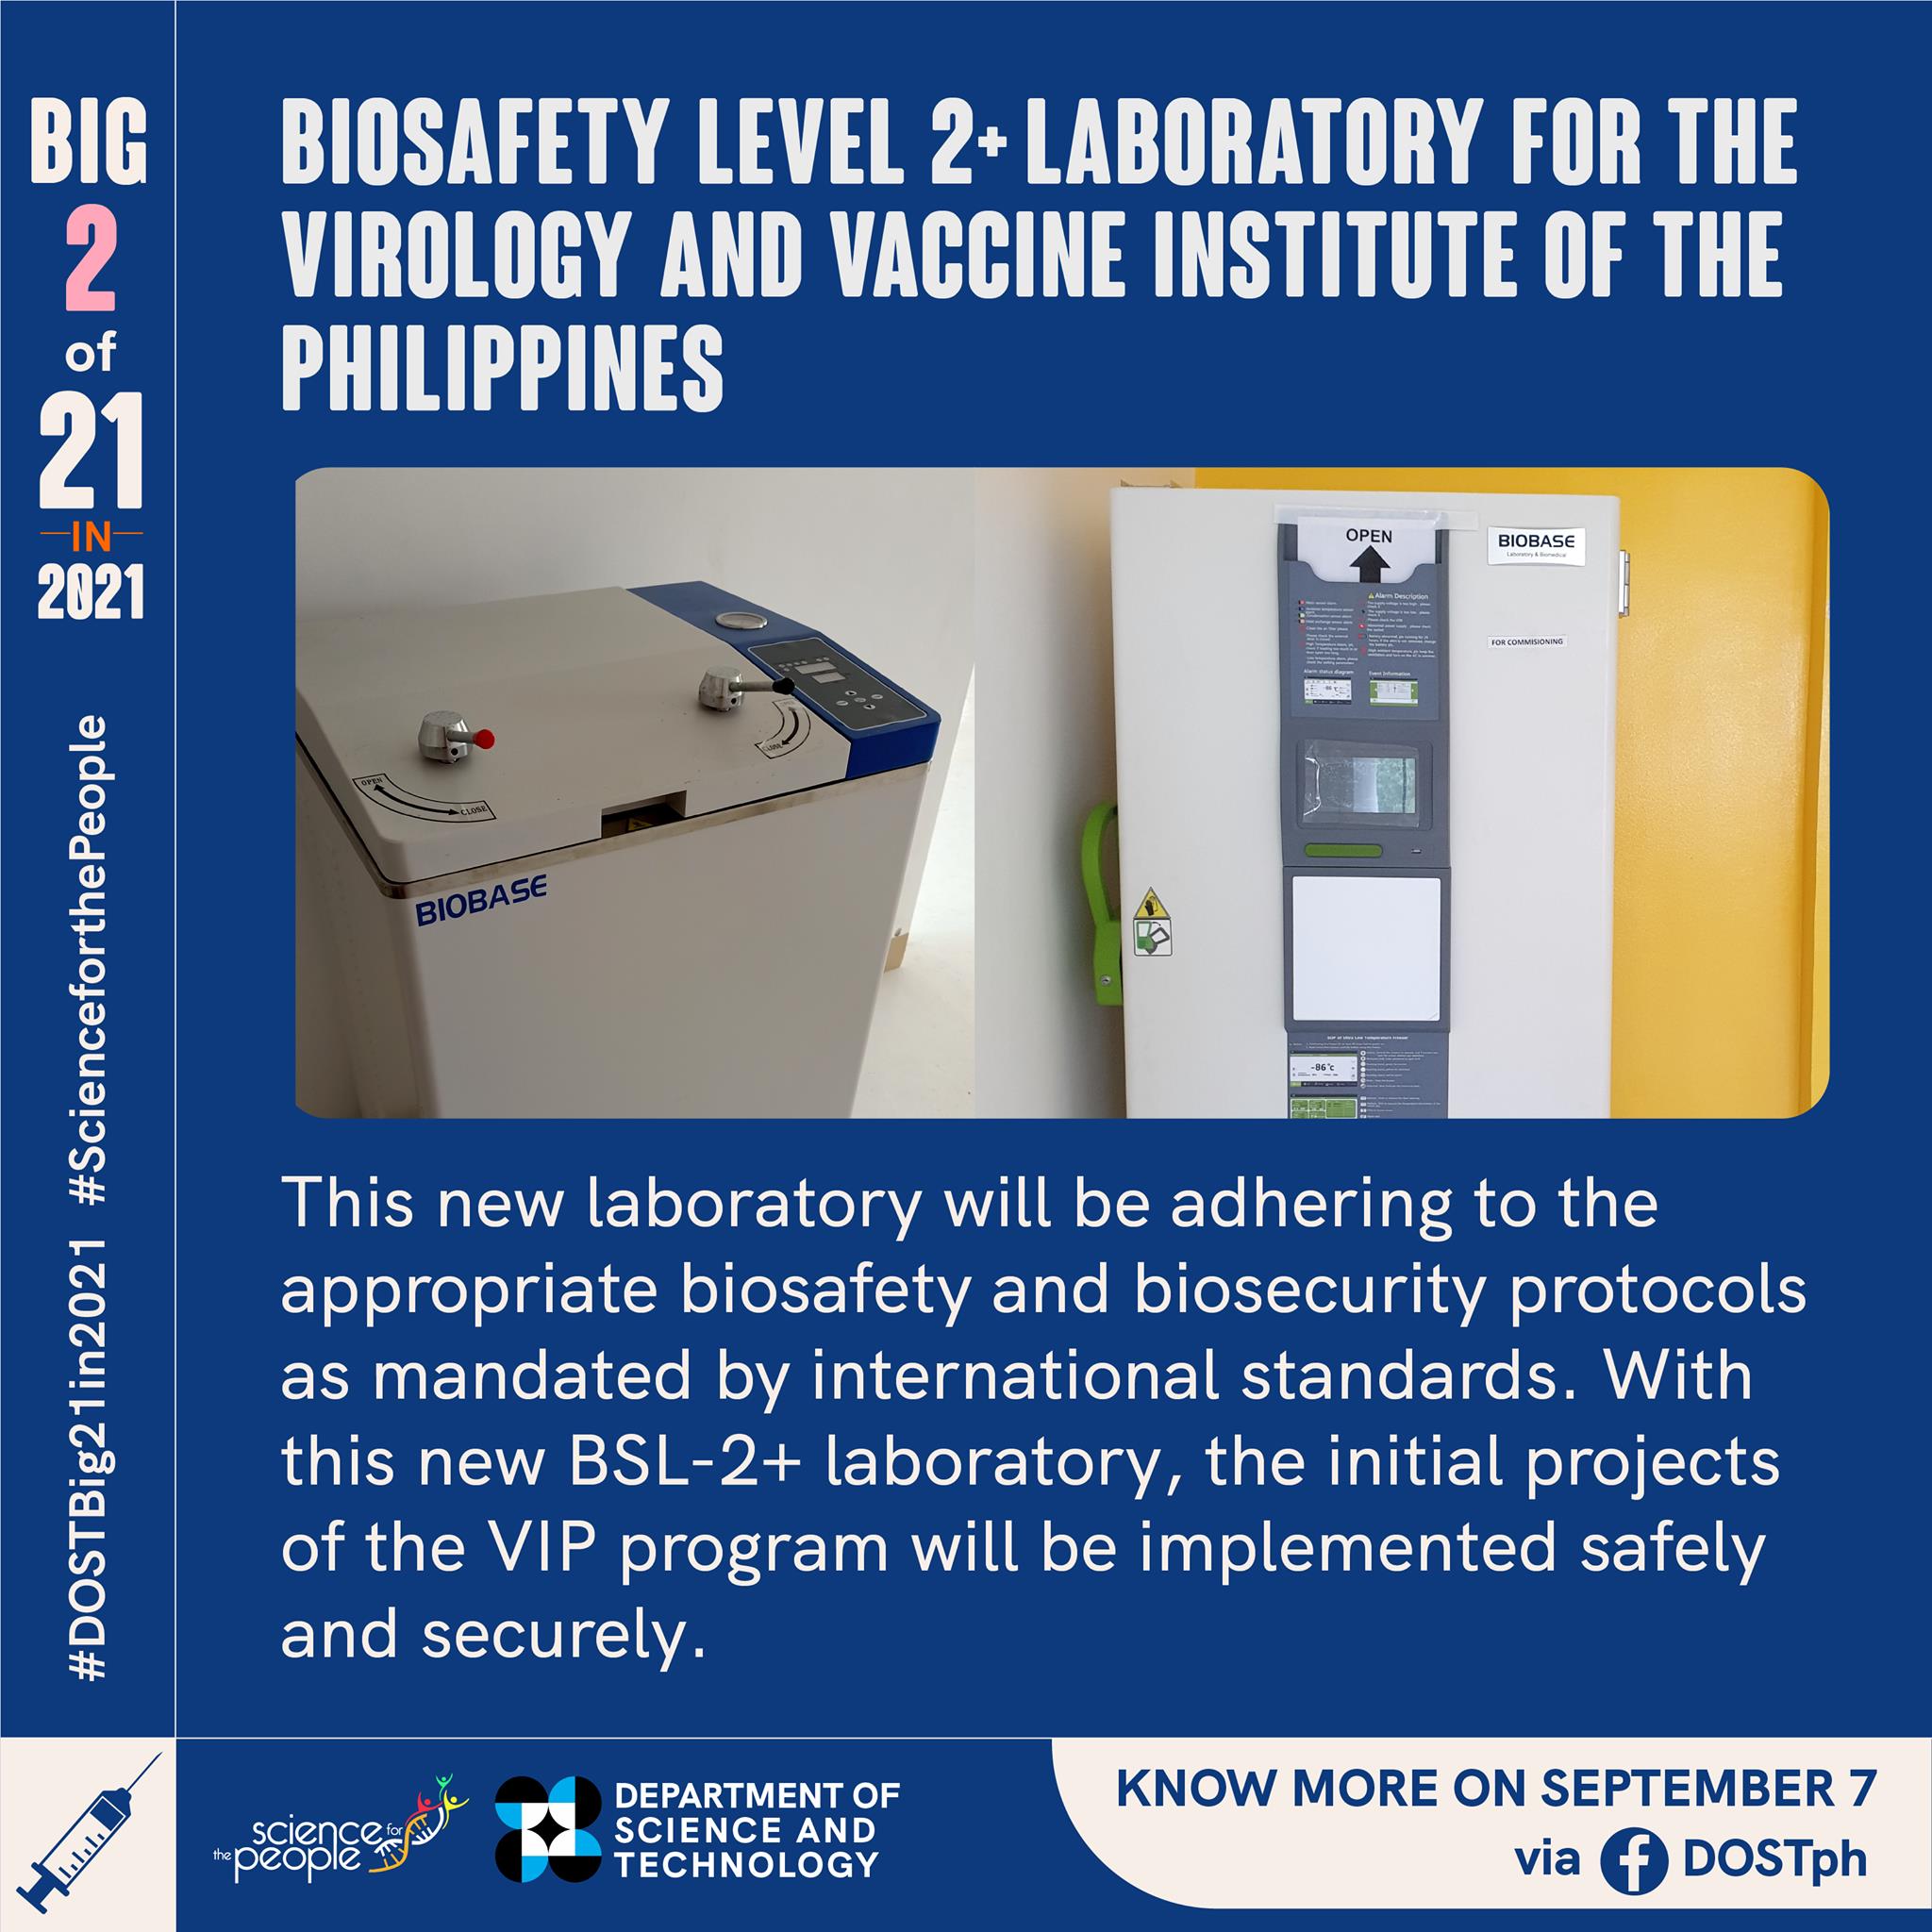 BSL-2+ Laboratory to be launched in preparation for the Virology and Vaccine Institute of the Philippines image